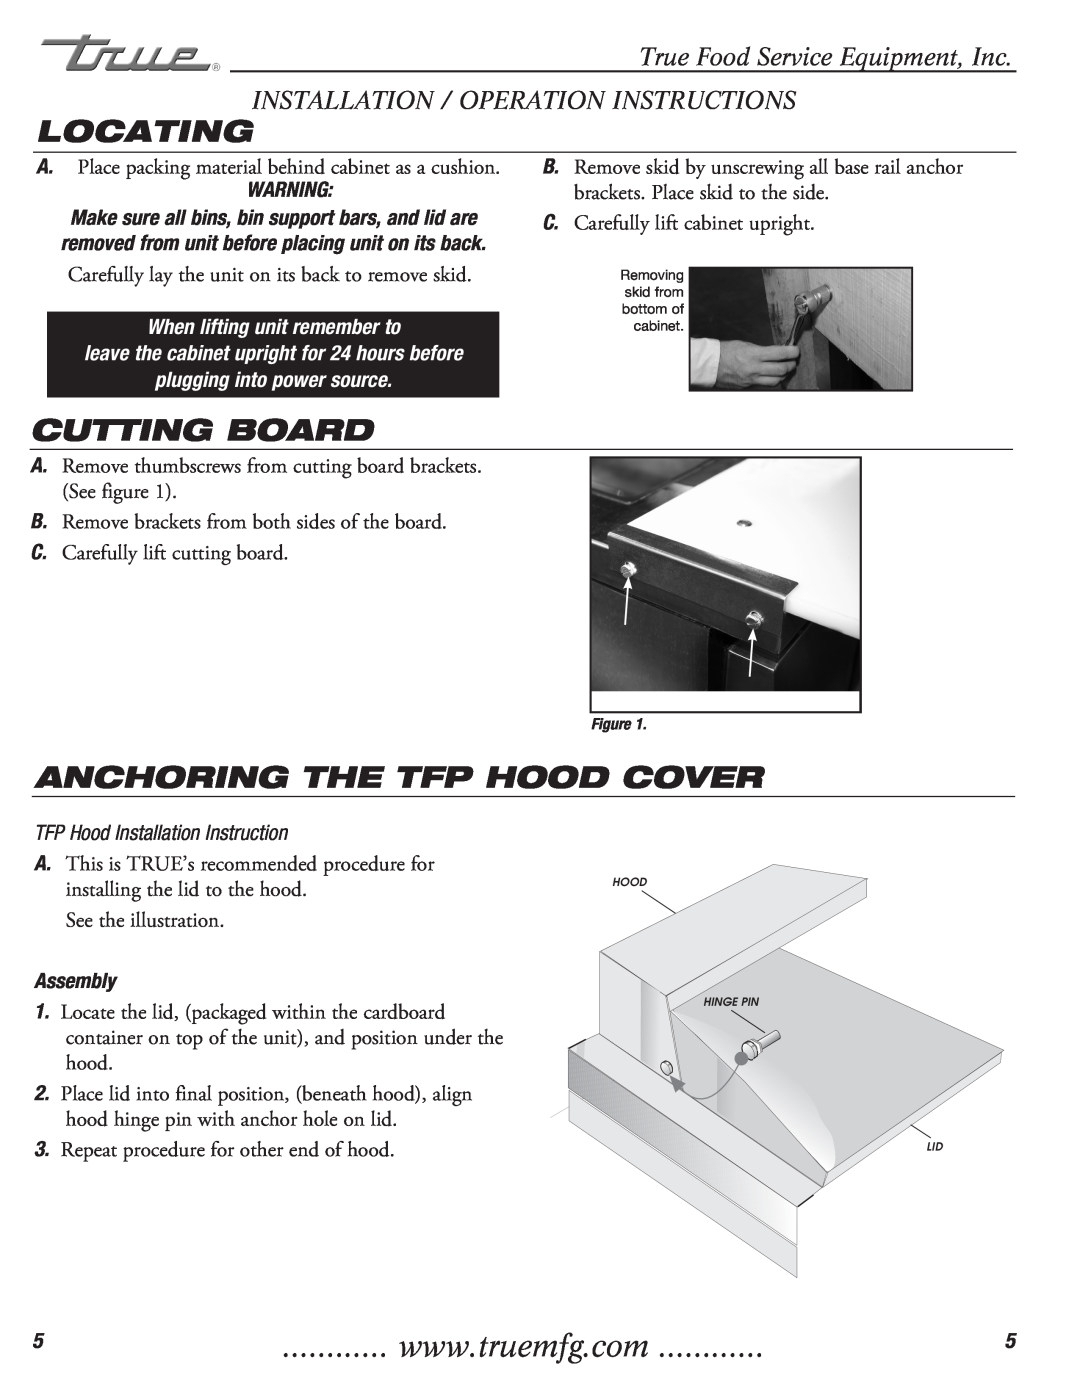 True Manufacturing Company TFP-32-12M-D-2 Locating, Cutting Board, Anchoring The Tfp Hood Cover, Assembly 